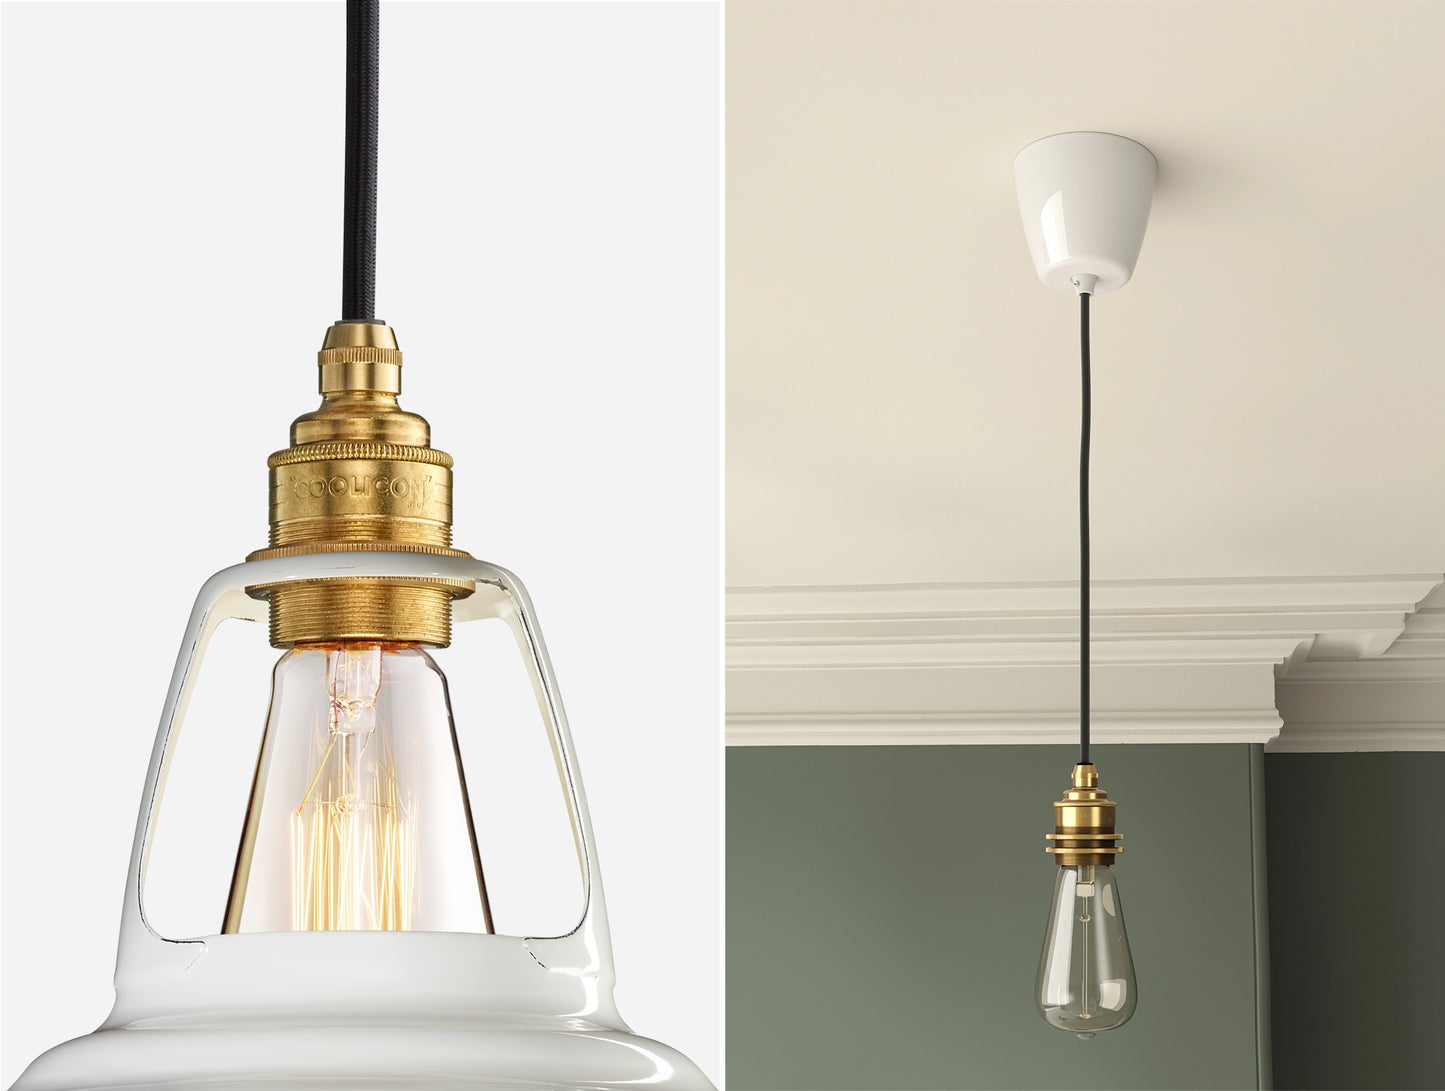 Close up of an E27 Signature Brass suspension set on a Original White lampshade on the left. On the right, an E27 Brass pendant set with a lightbulb is hanging from the ceiling